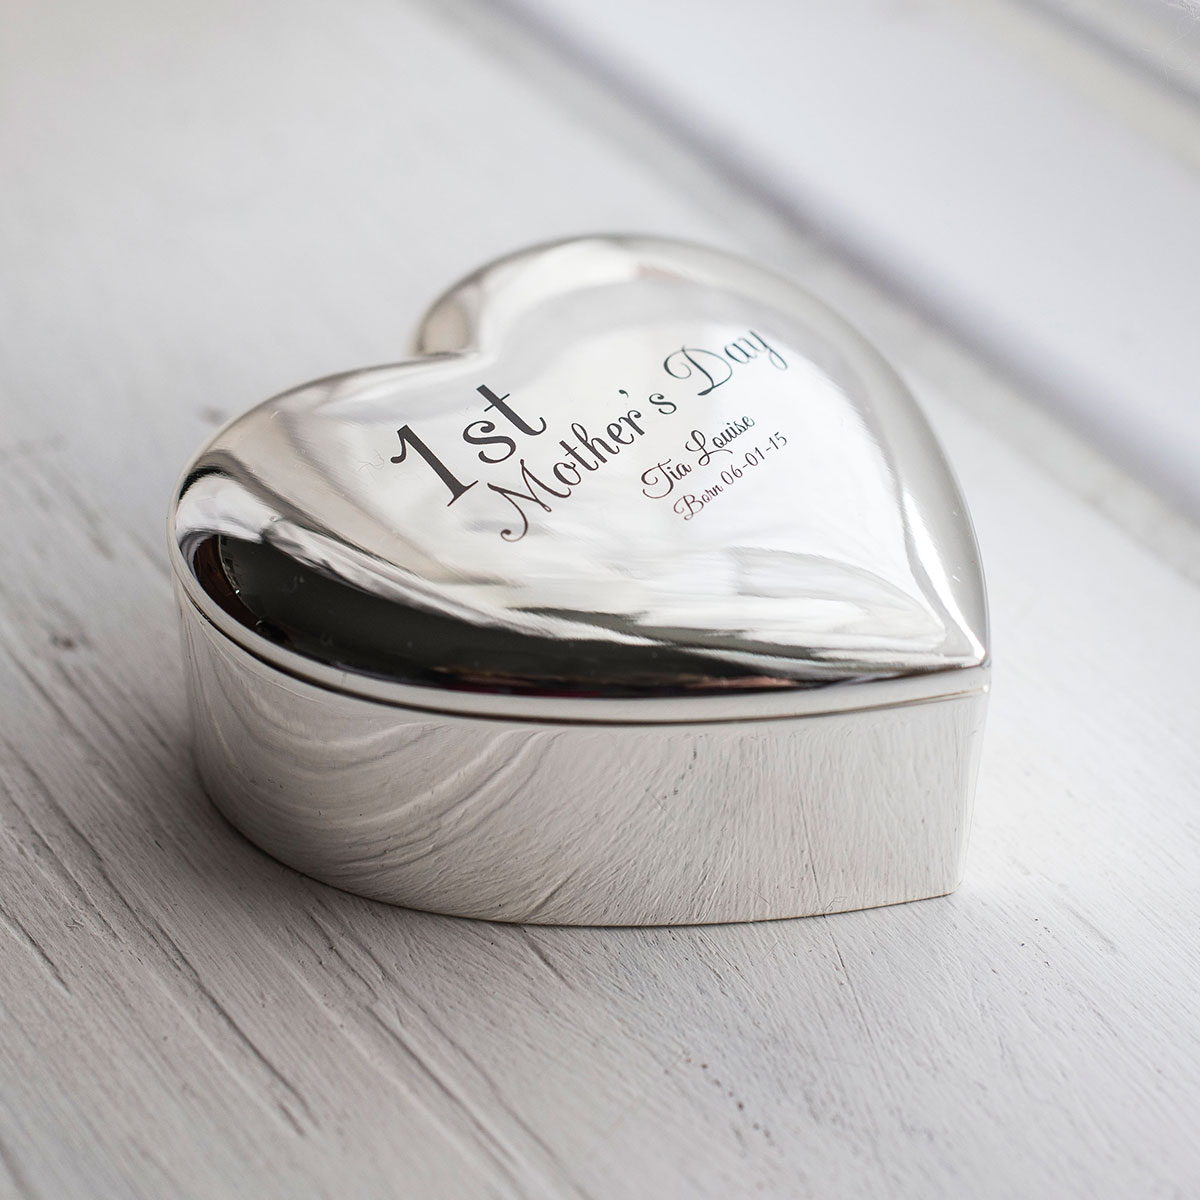 Engraved Silver-Plated Heart Trinket Box - 1st Mother's Day